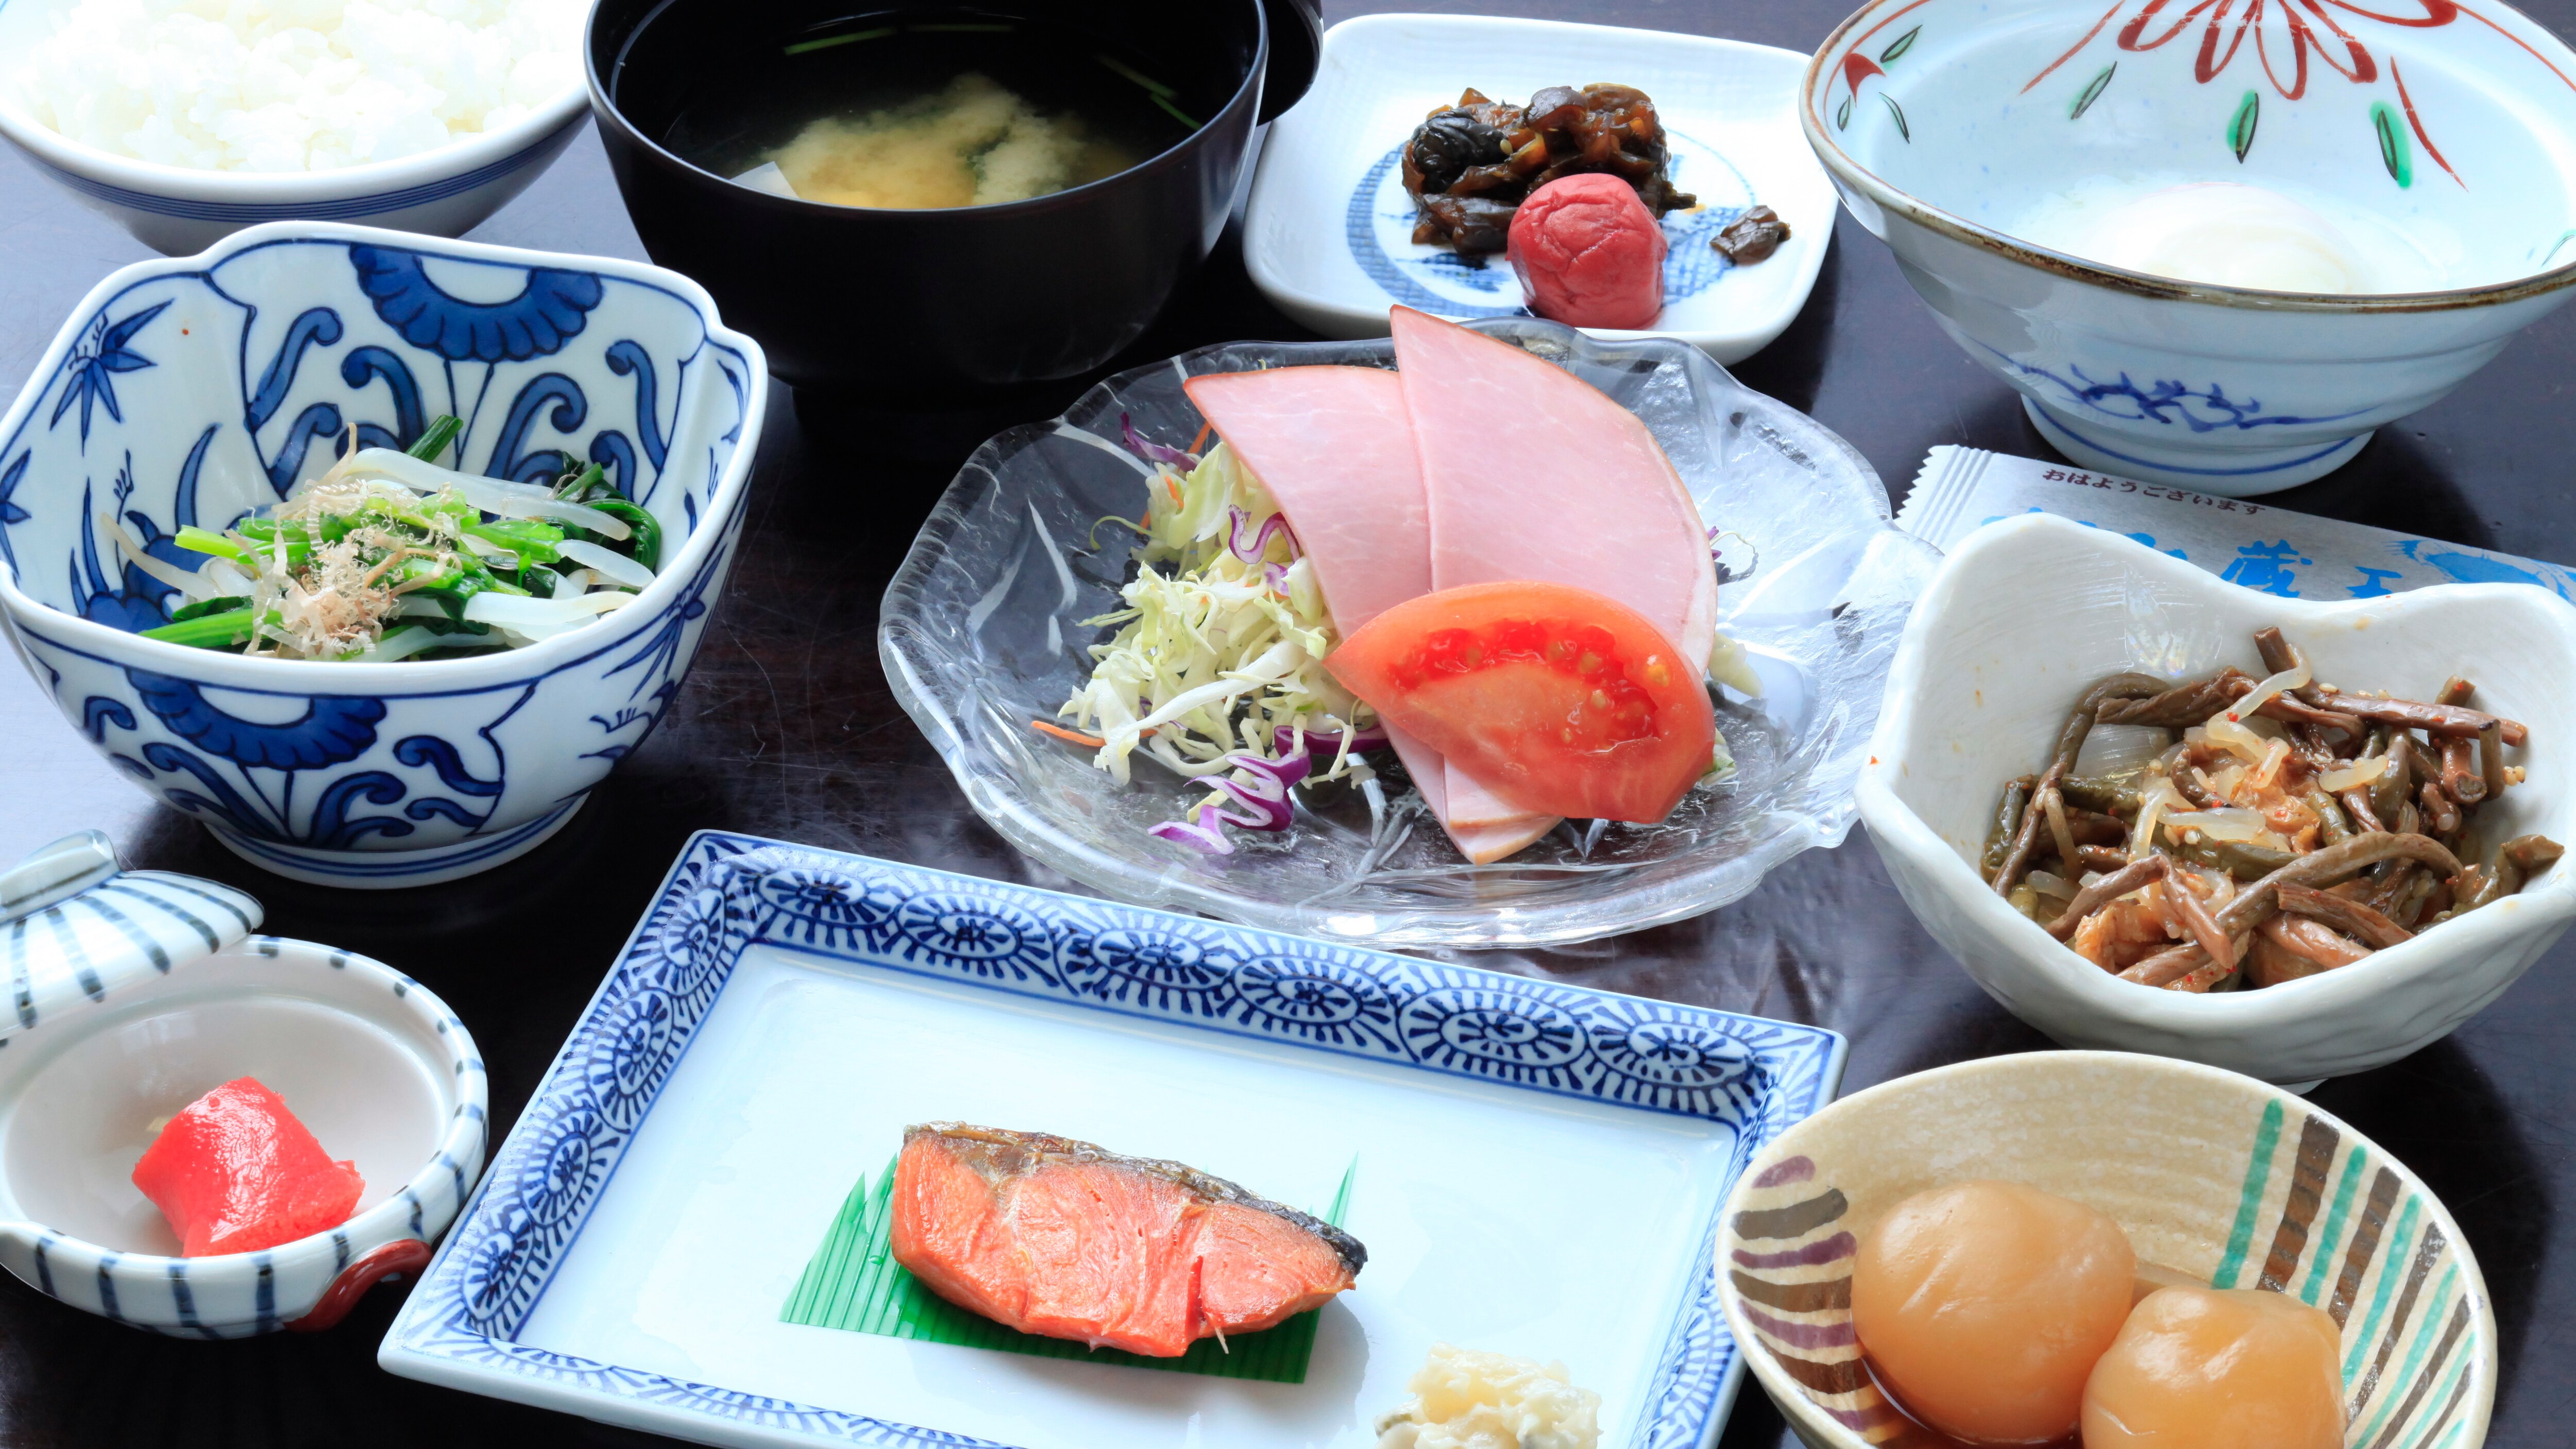 Breakfast / Simple Japanese set meal without decoration * Image